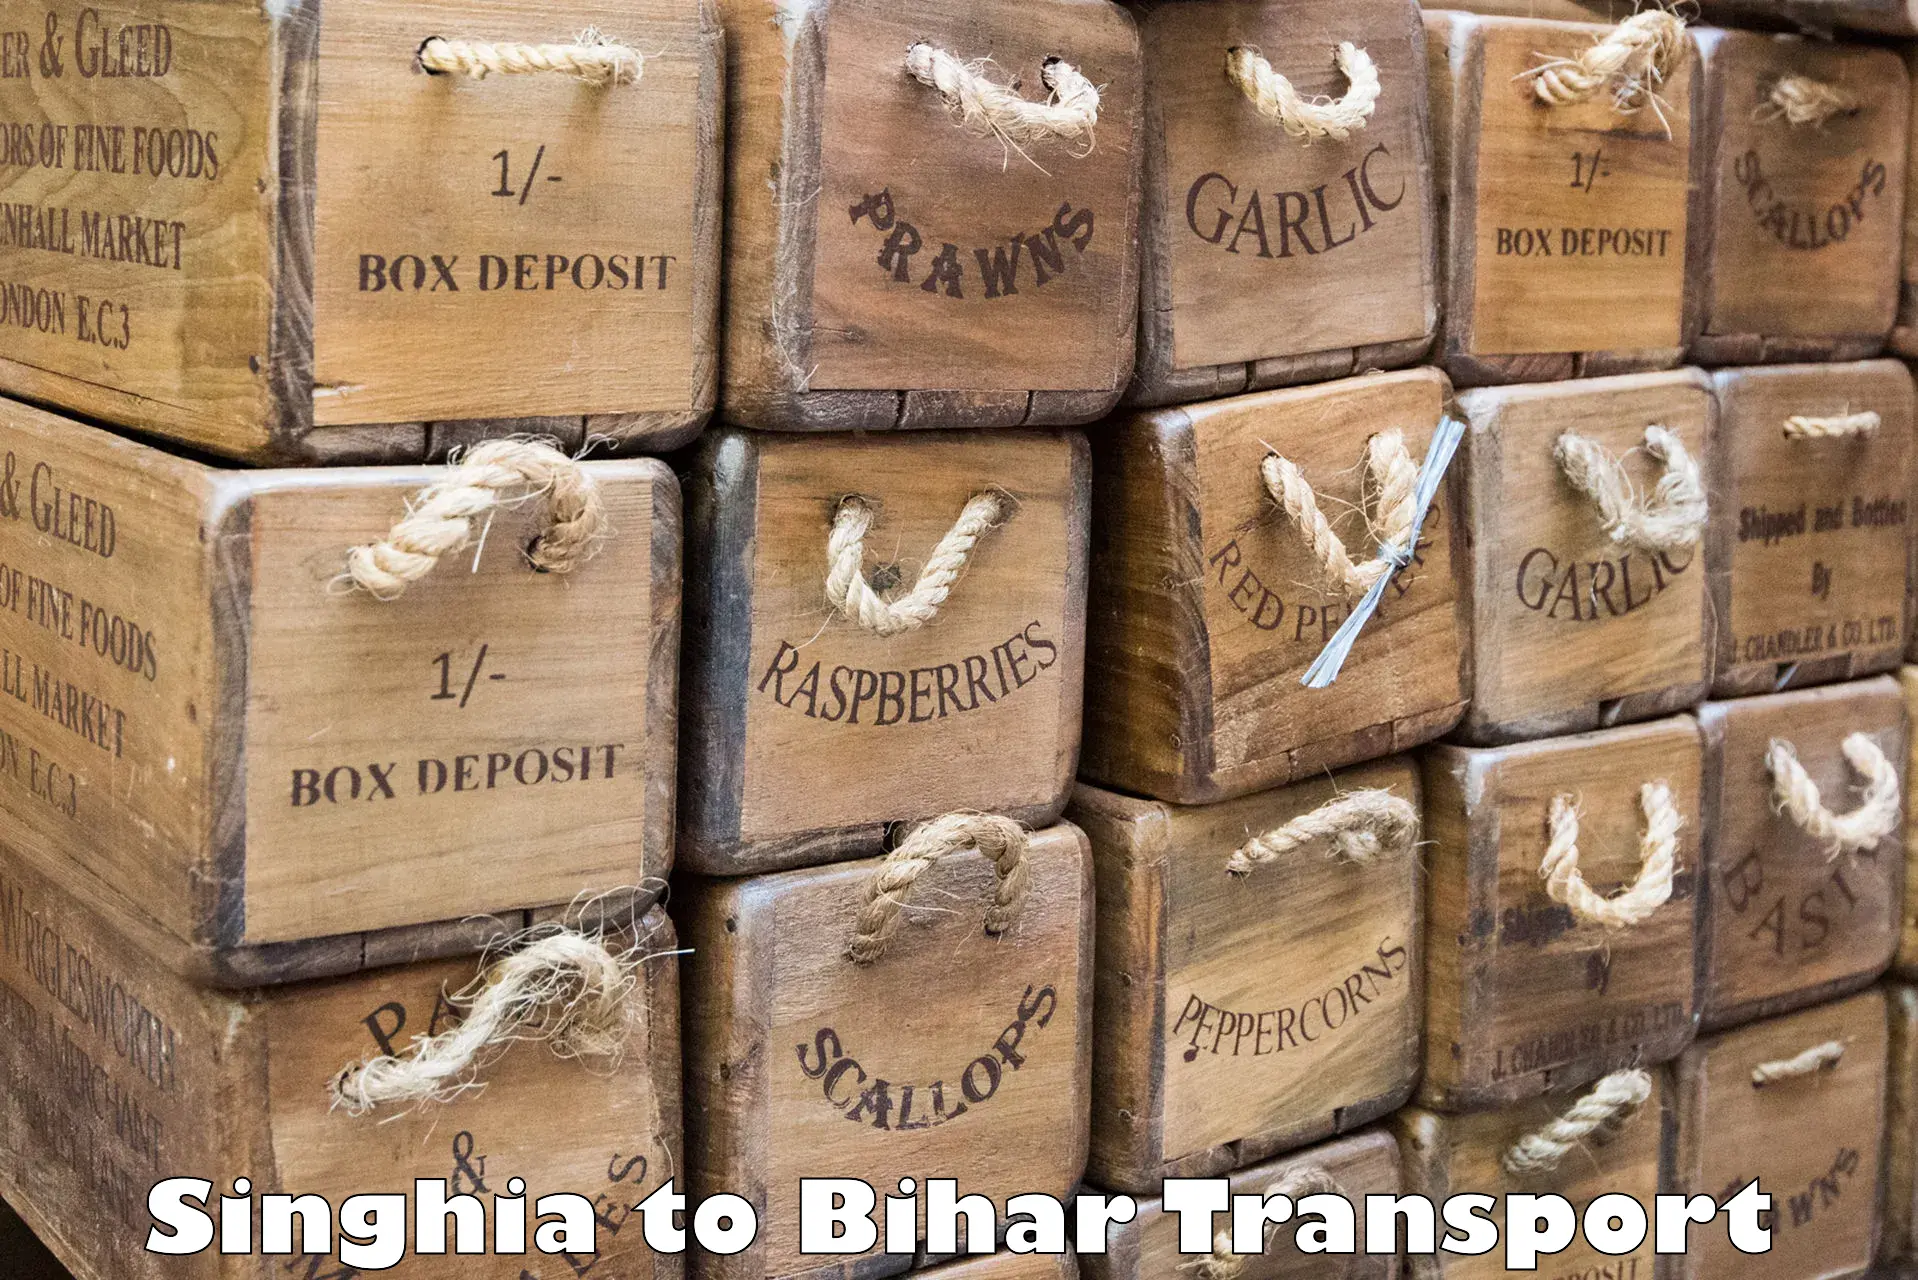 Parcel transport services Singhia to Bankipore